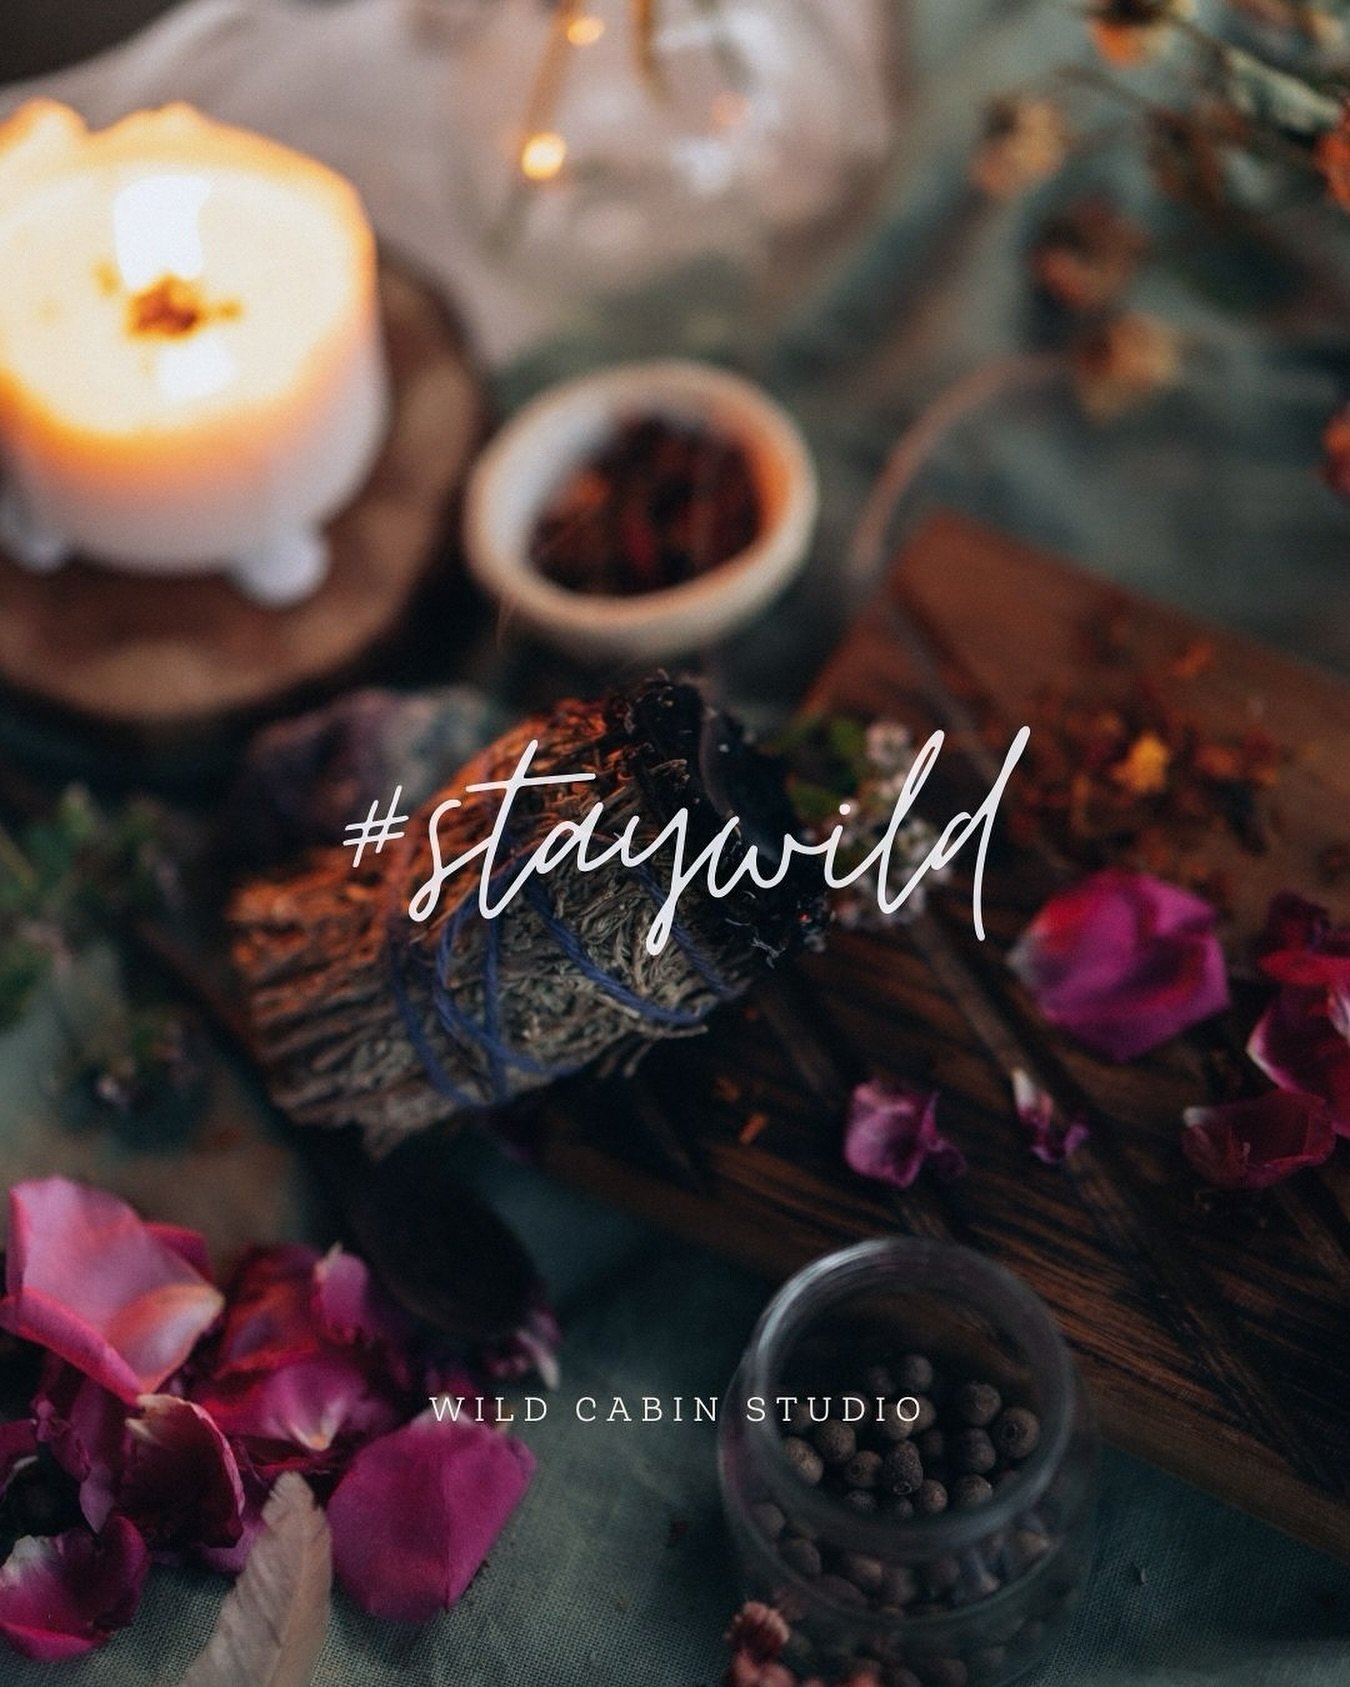 &ldquo;Stay Wild&rdquo; is more than just words; it&rsquo;s our collective mantra. It&rsquo;s an invitation to break away from the conventional and venture into the extraordinary. Let us help manifest a logo and brand identity that mirrors the wild a